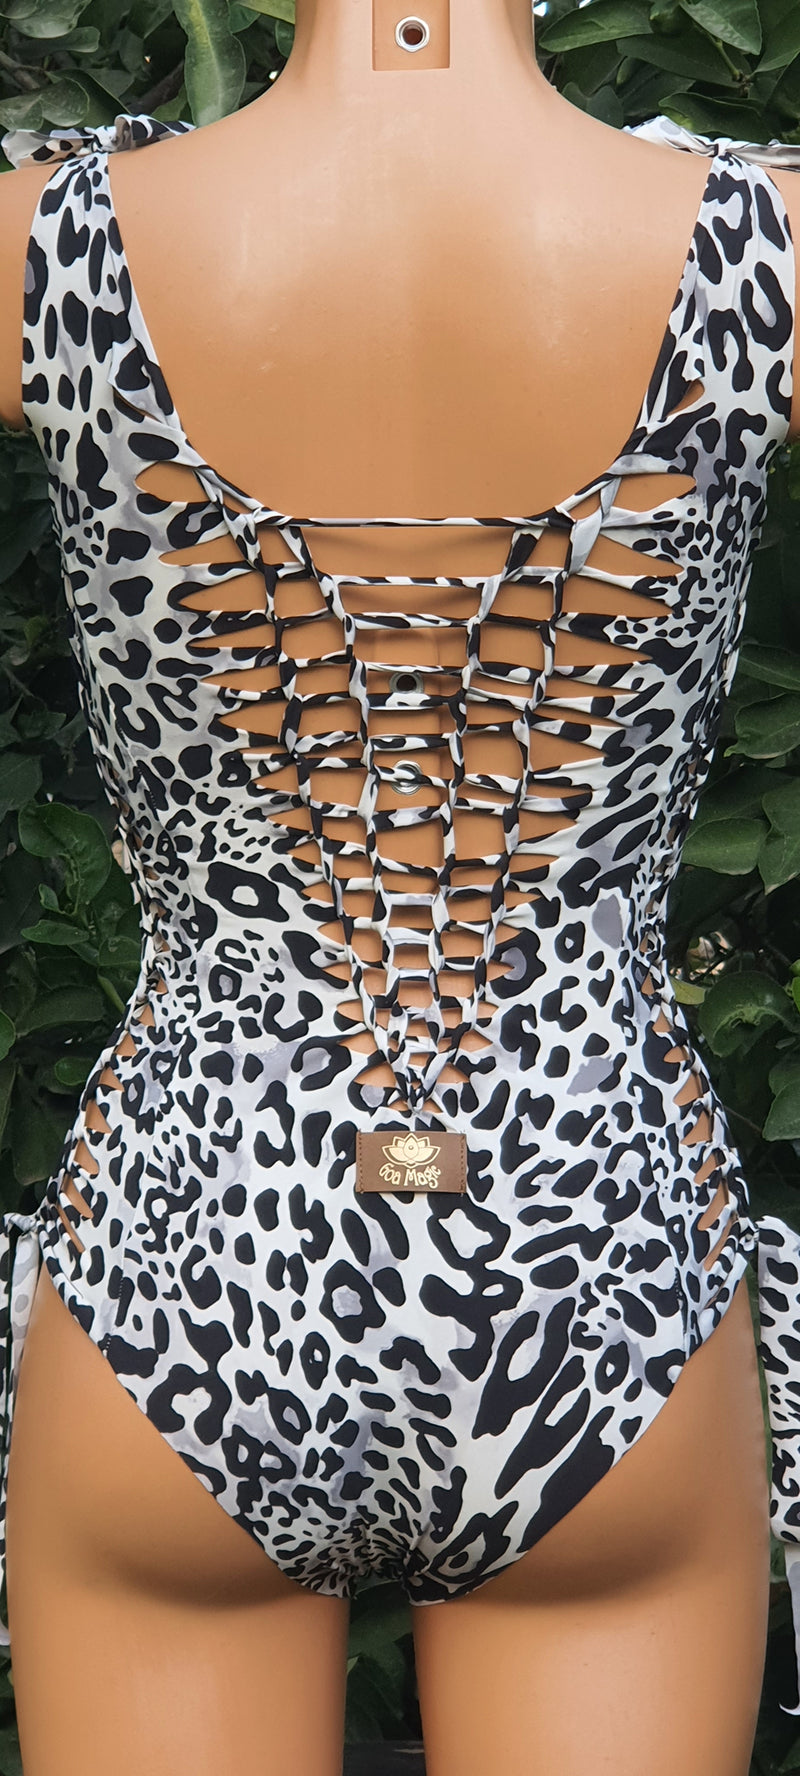 Clearance - One Piece Swimsuit For Women in Black Leopard print "SIDE" (Lycra Fabric)